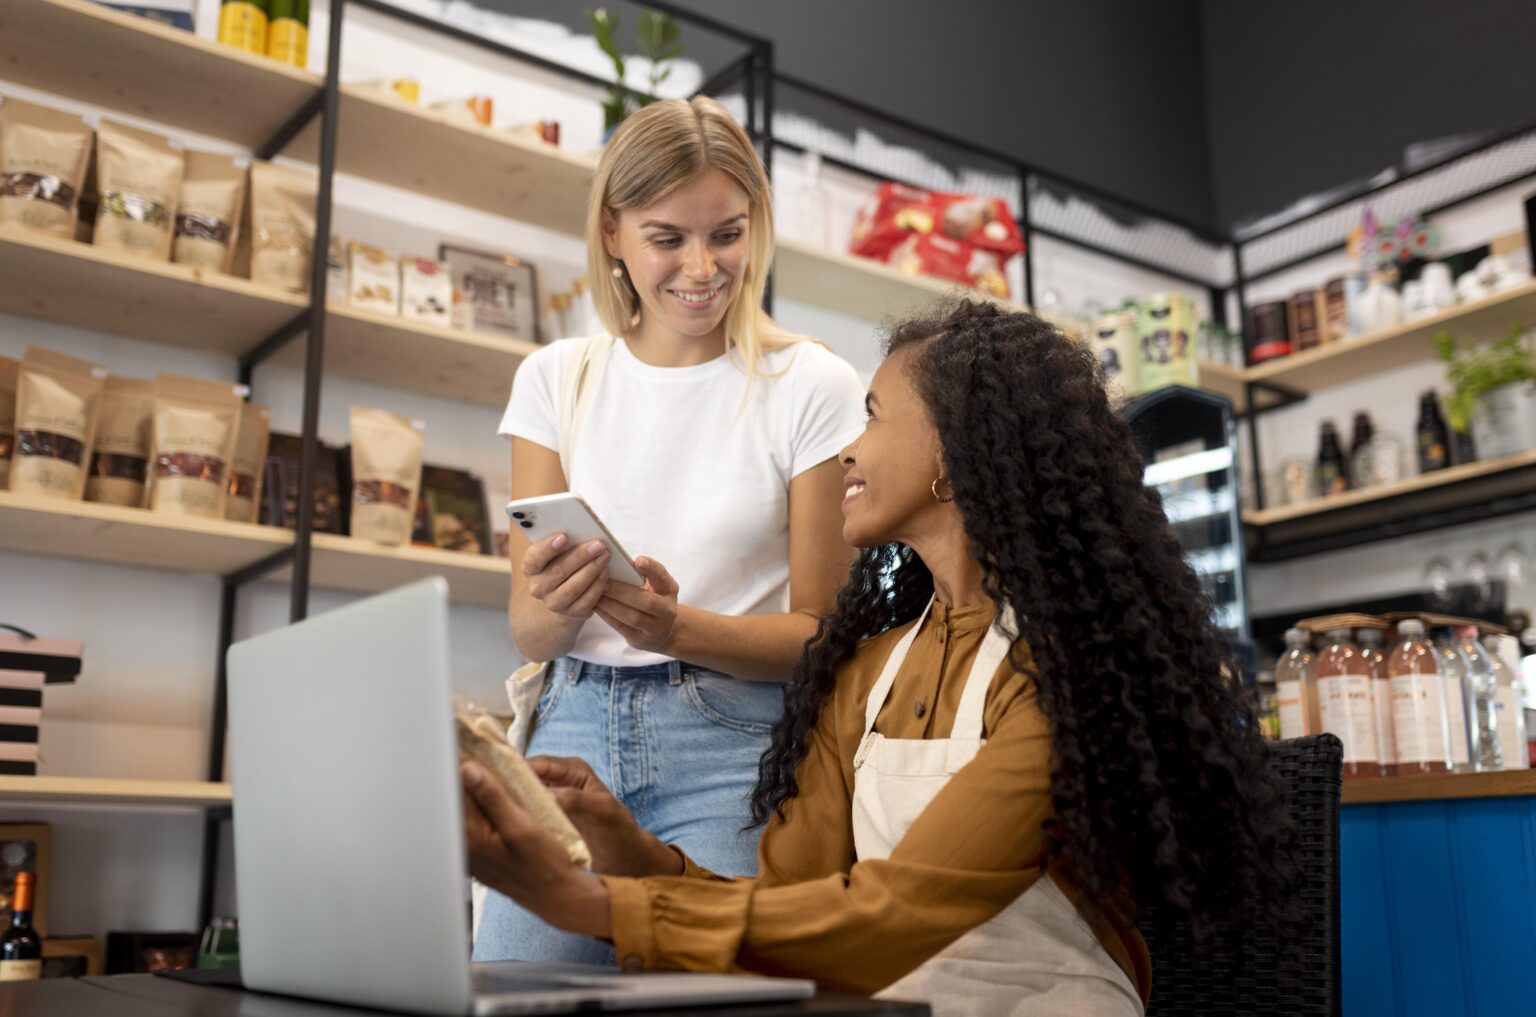 Leveraging customer data: The key to delivering personalized retail experiences